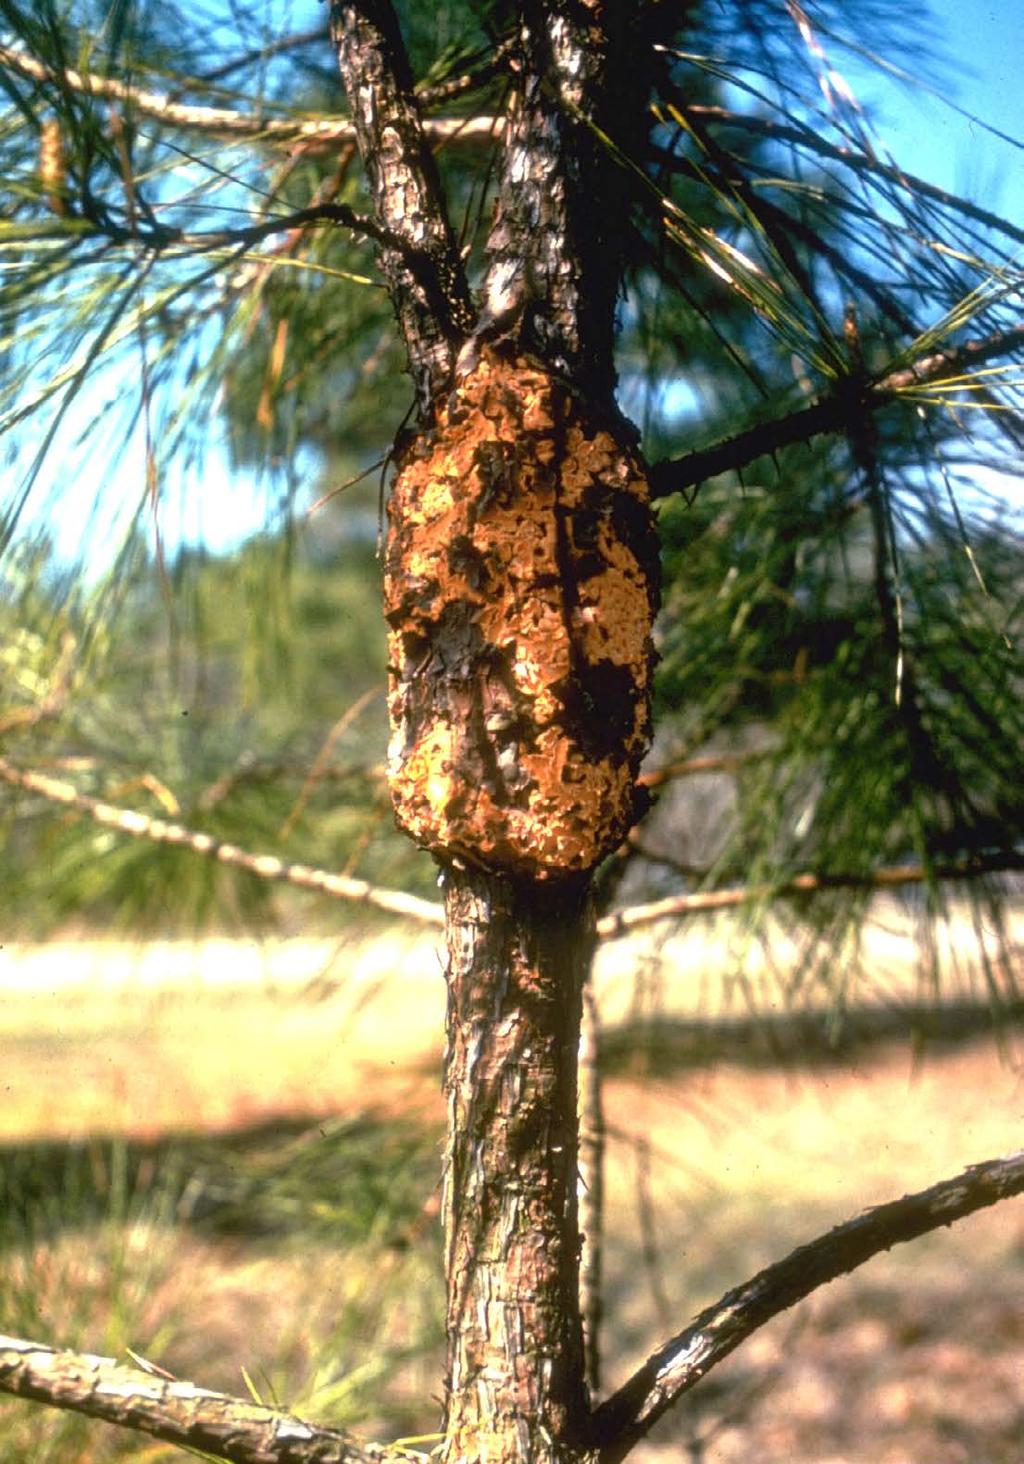 FUSIFORM RUST This is the most common fungal disease in southern pines and has resulted in millions of dollars in losses in timber. The rust fungus, Cronartium quercum, causes this disease.